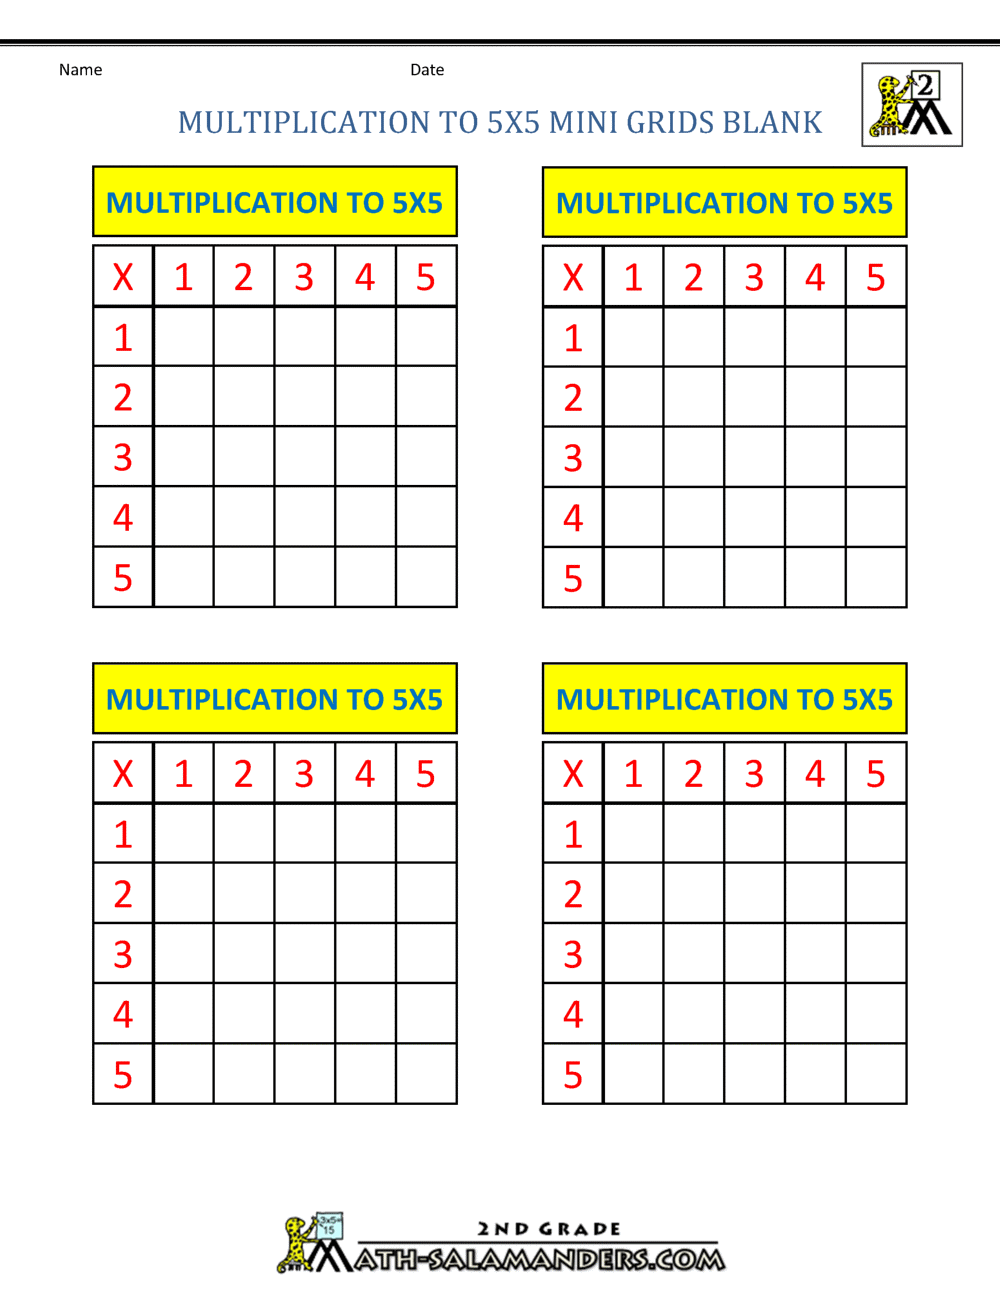 5 times tables multiplication drills - gdlomi